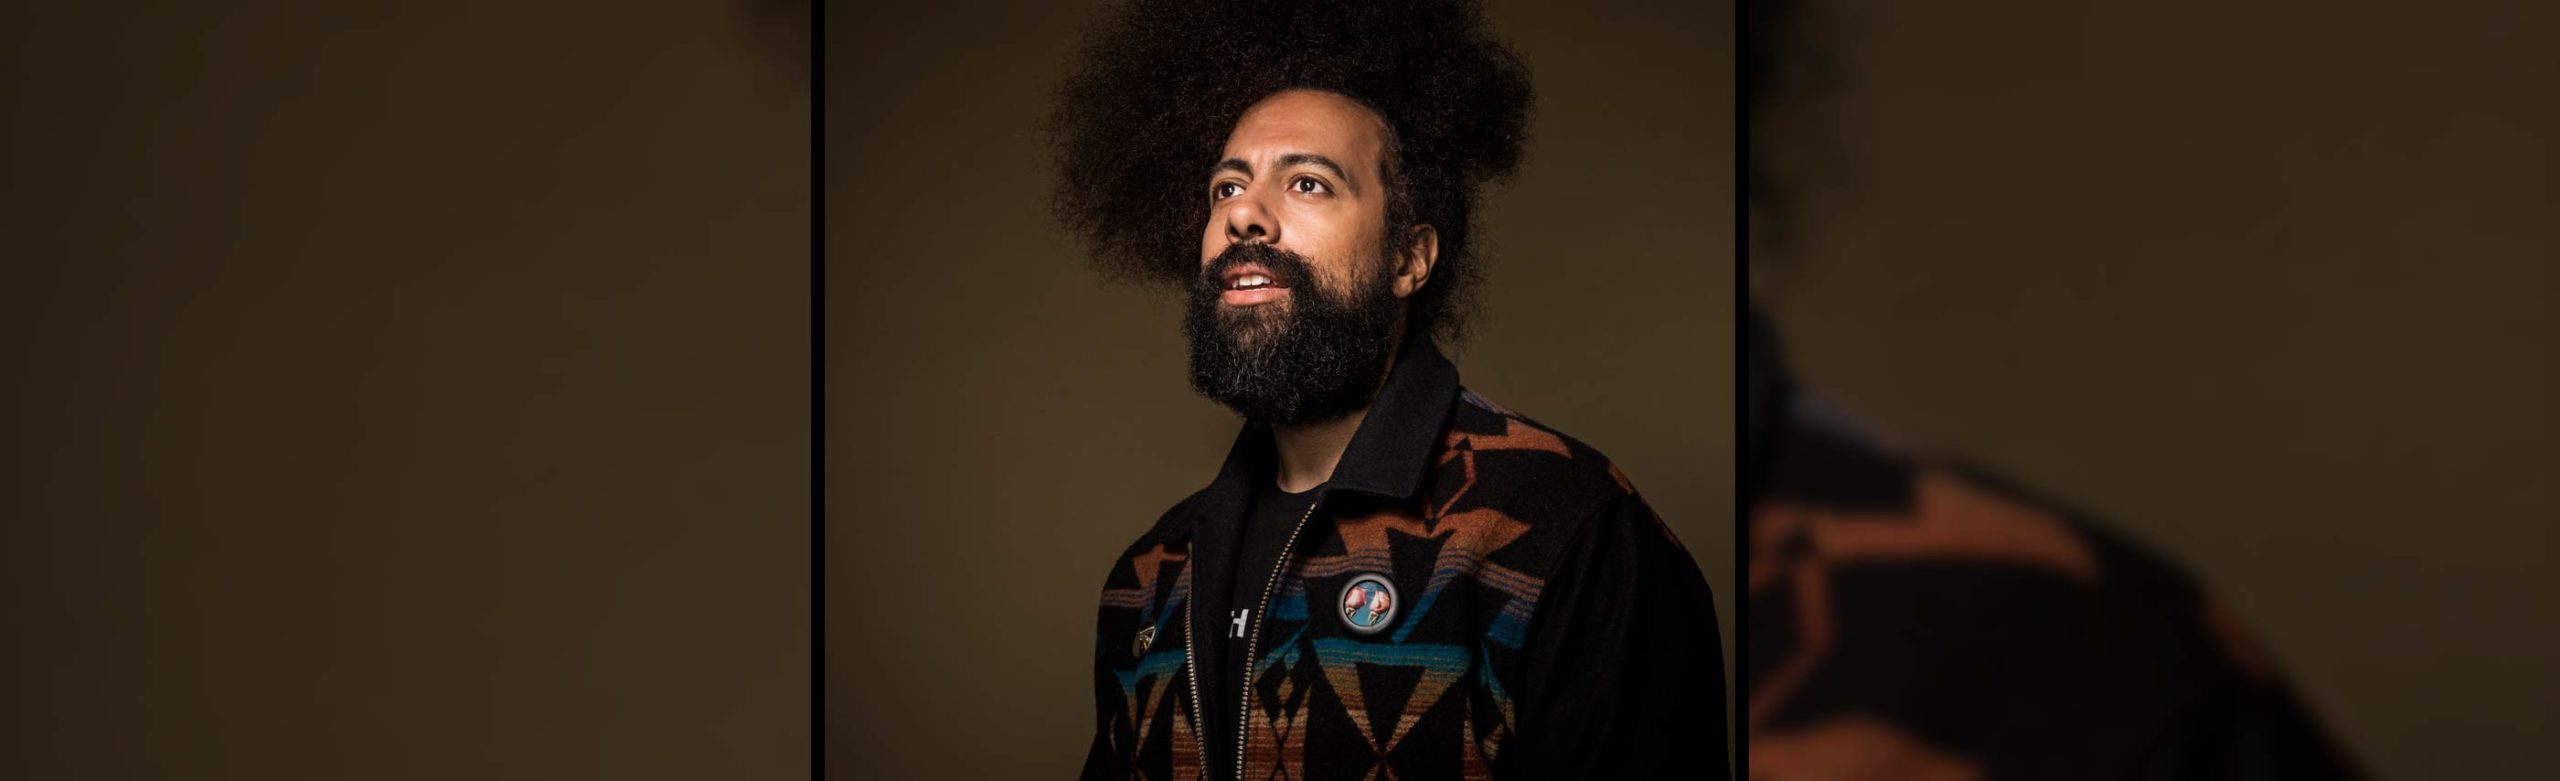 Man of Many Talents Reggie Watts Confirms Return to Montana for Annual Christmas Shows Image